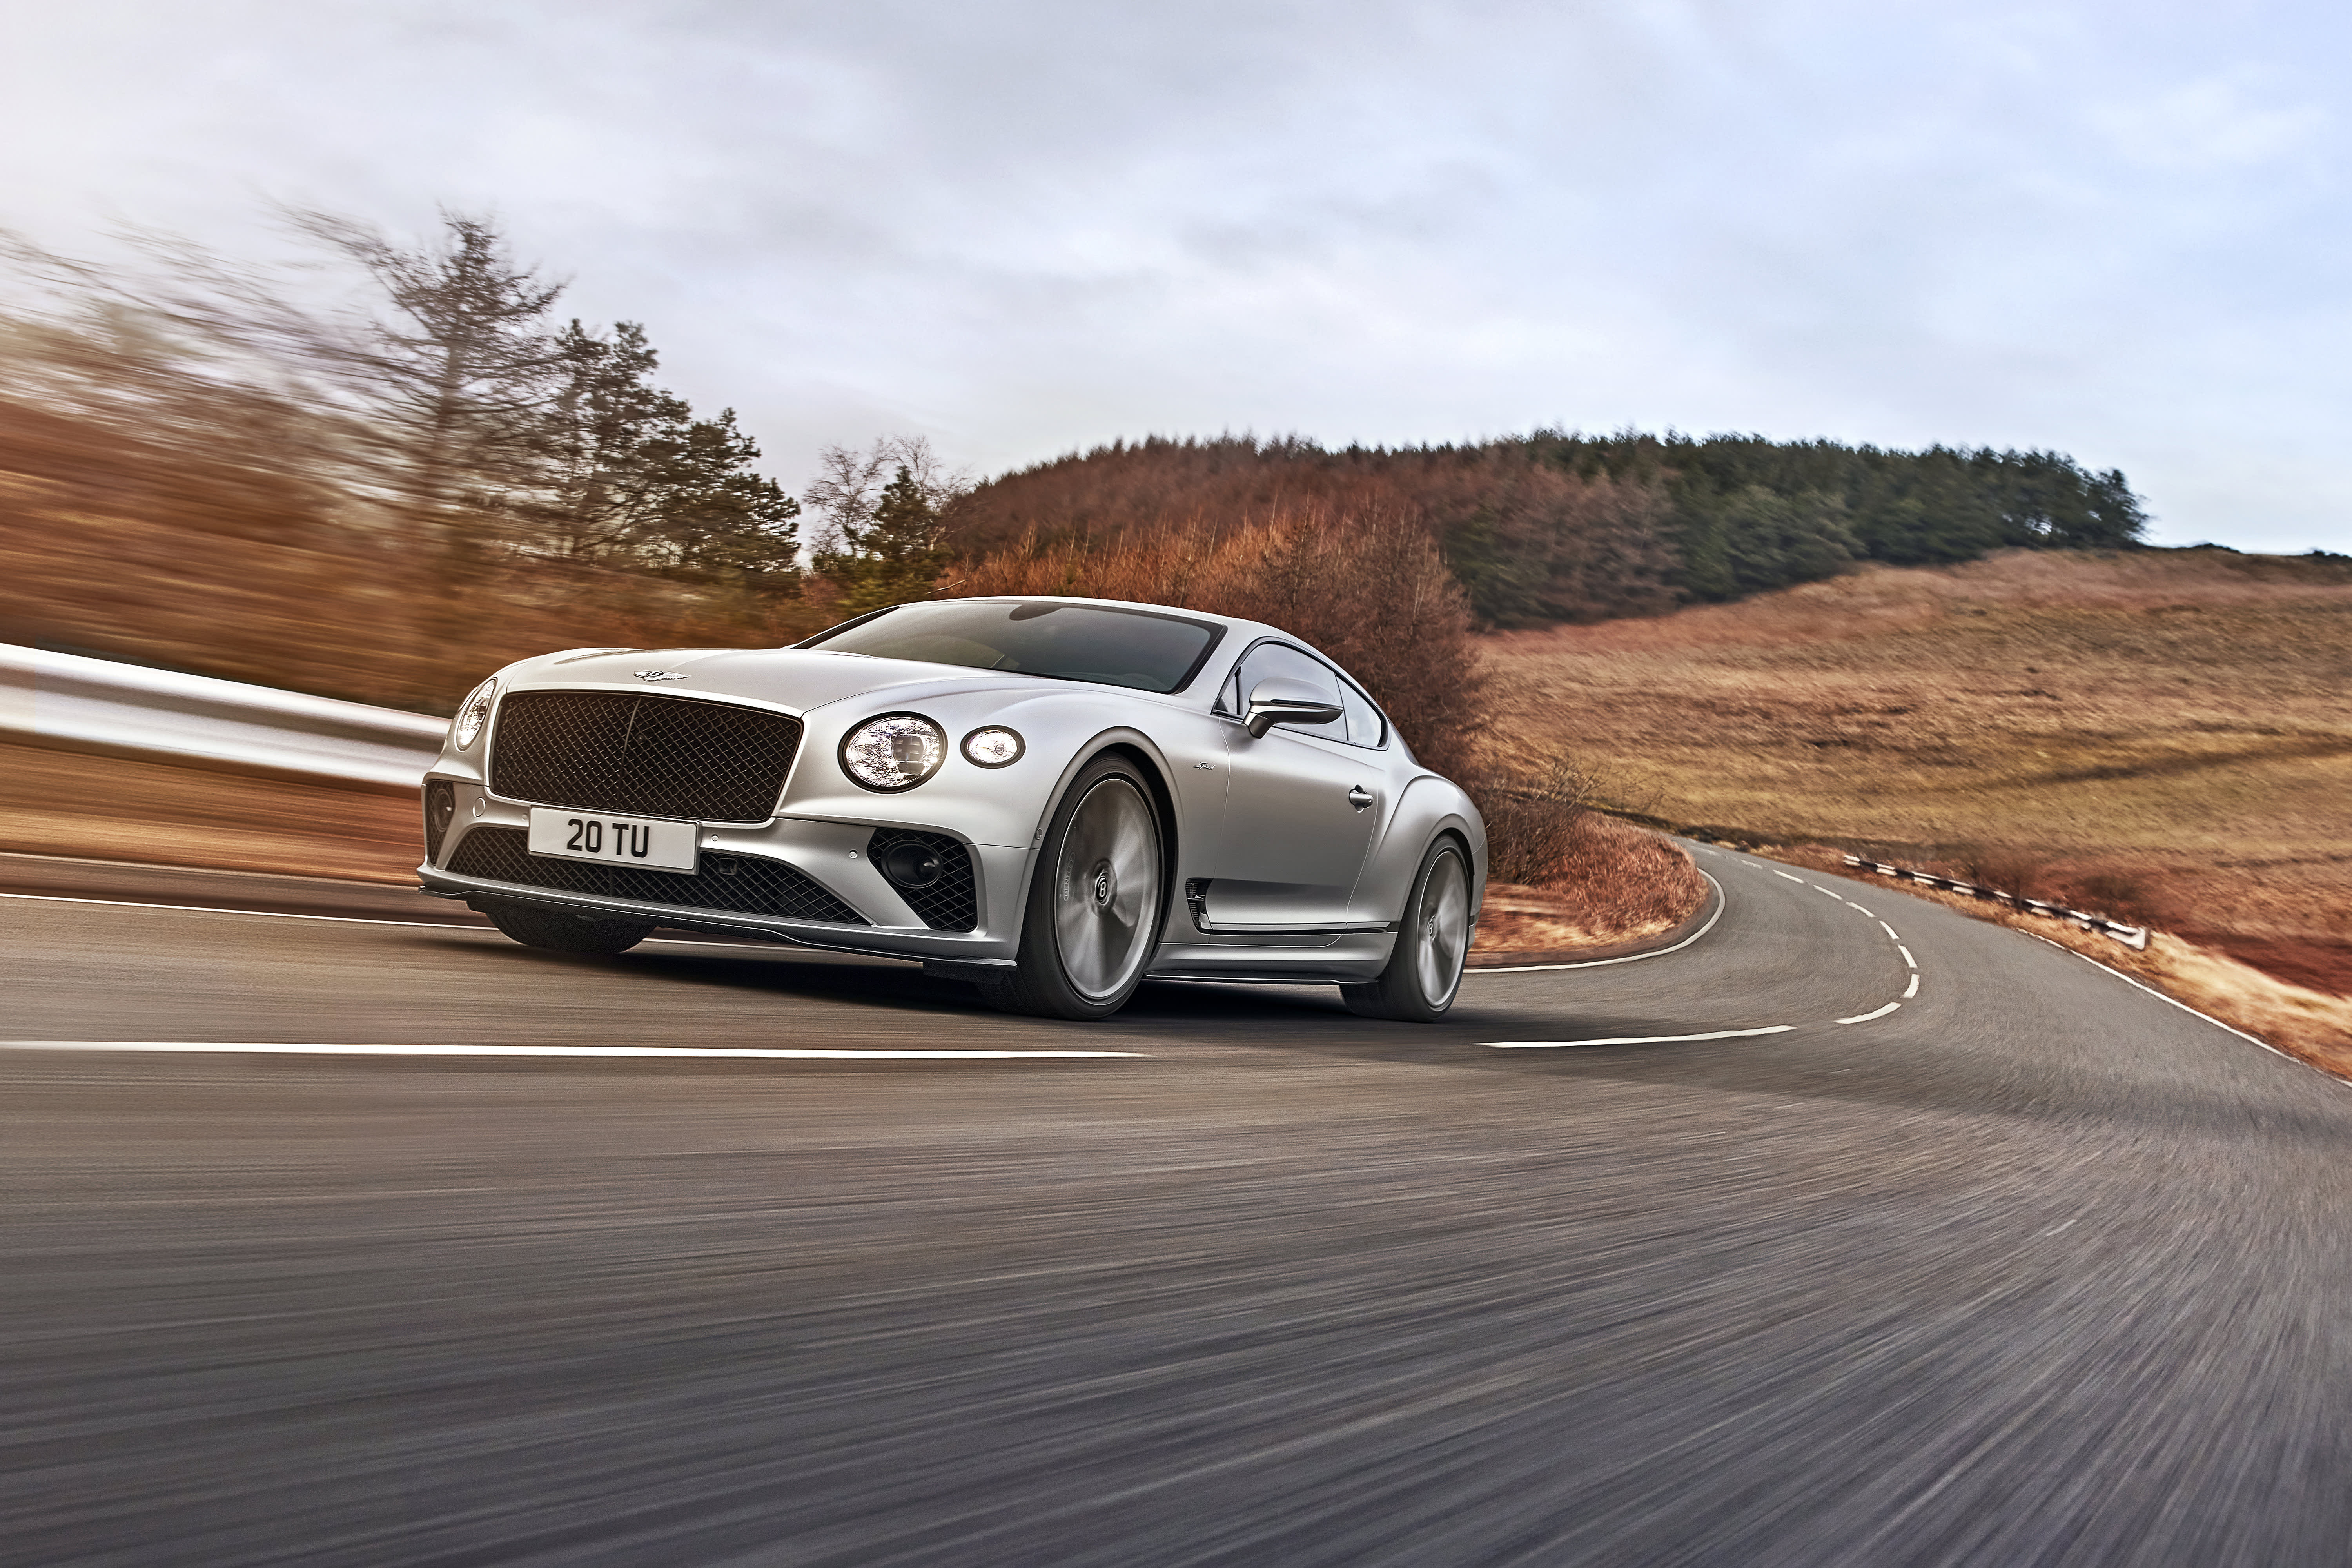 Discover Bentley’s new 208 mph Continental GT Speed ​​for $ 275,000